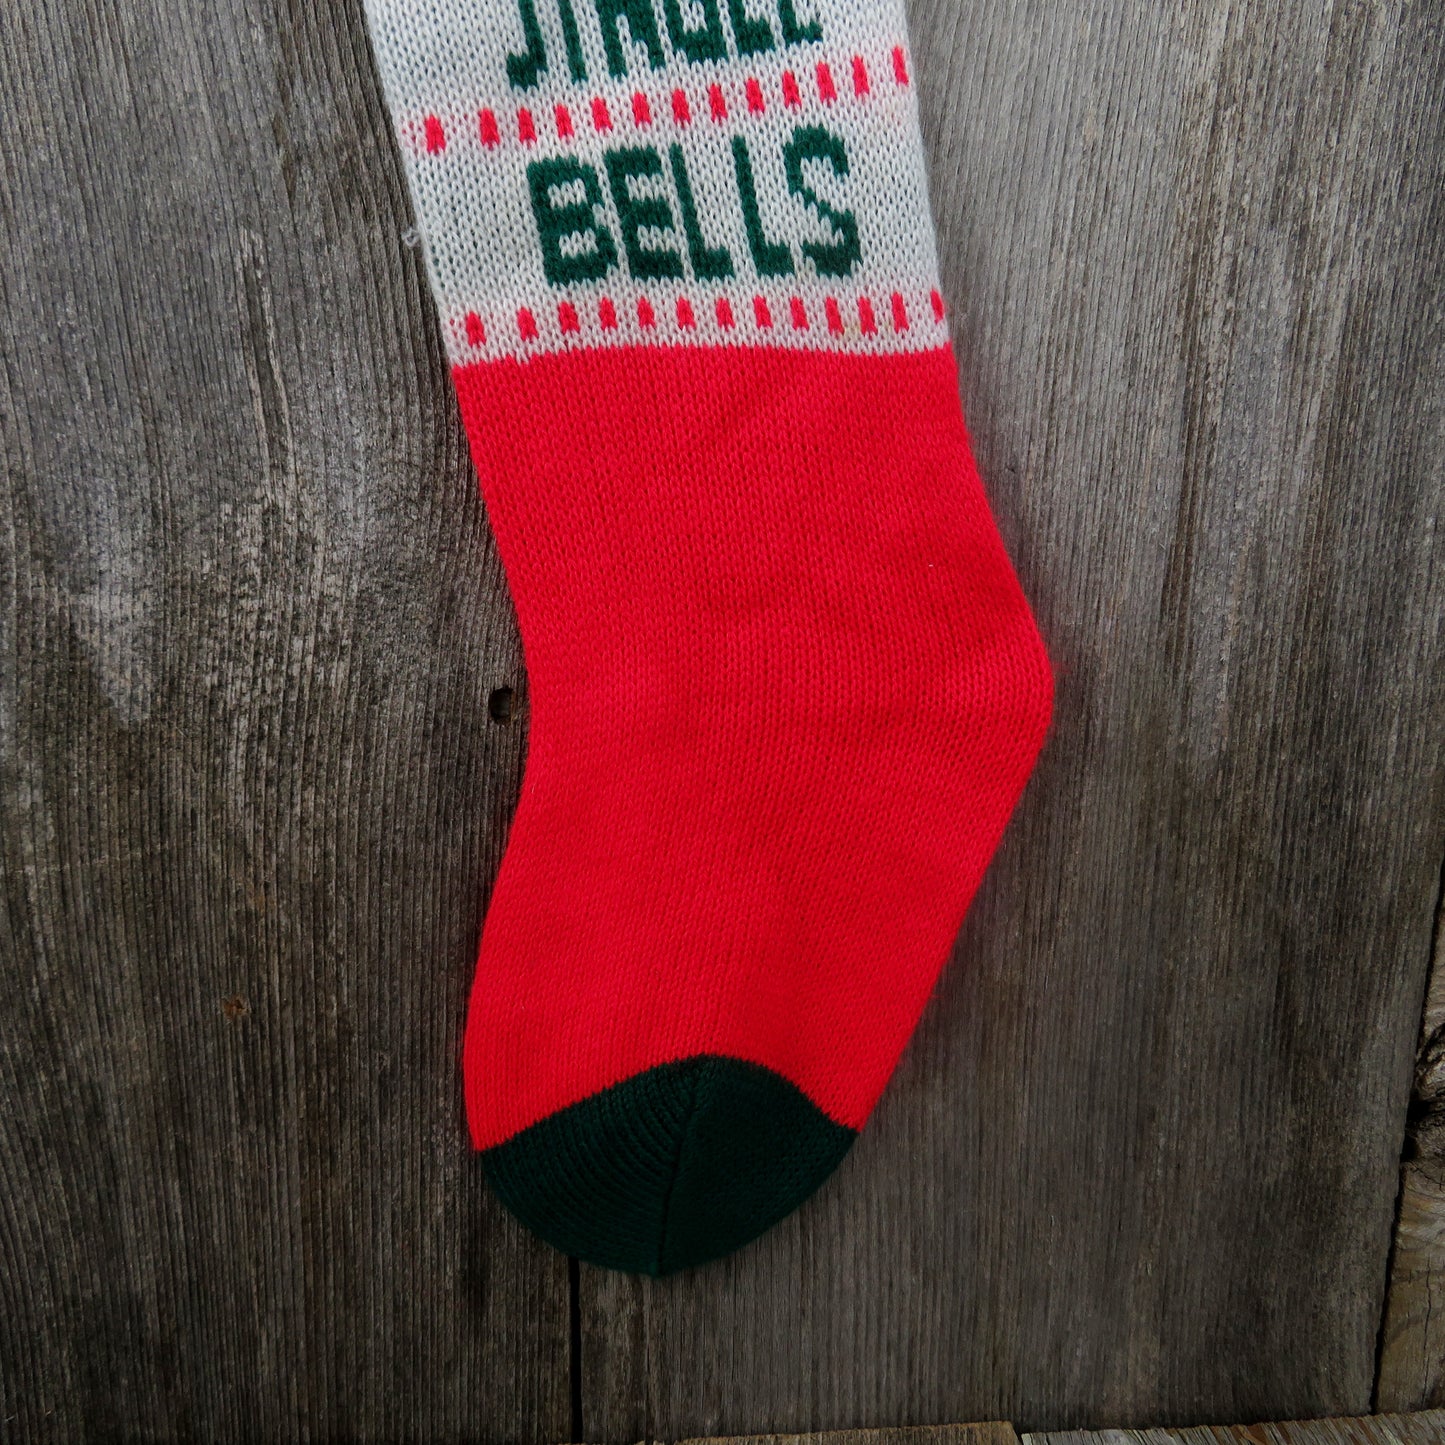 Christmas Stocking Knitted Knit Jingle Bells Music Notes Red Green Vtg 1980s s10 - At Grandma's Table